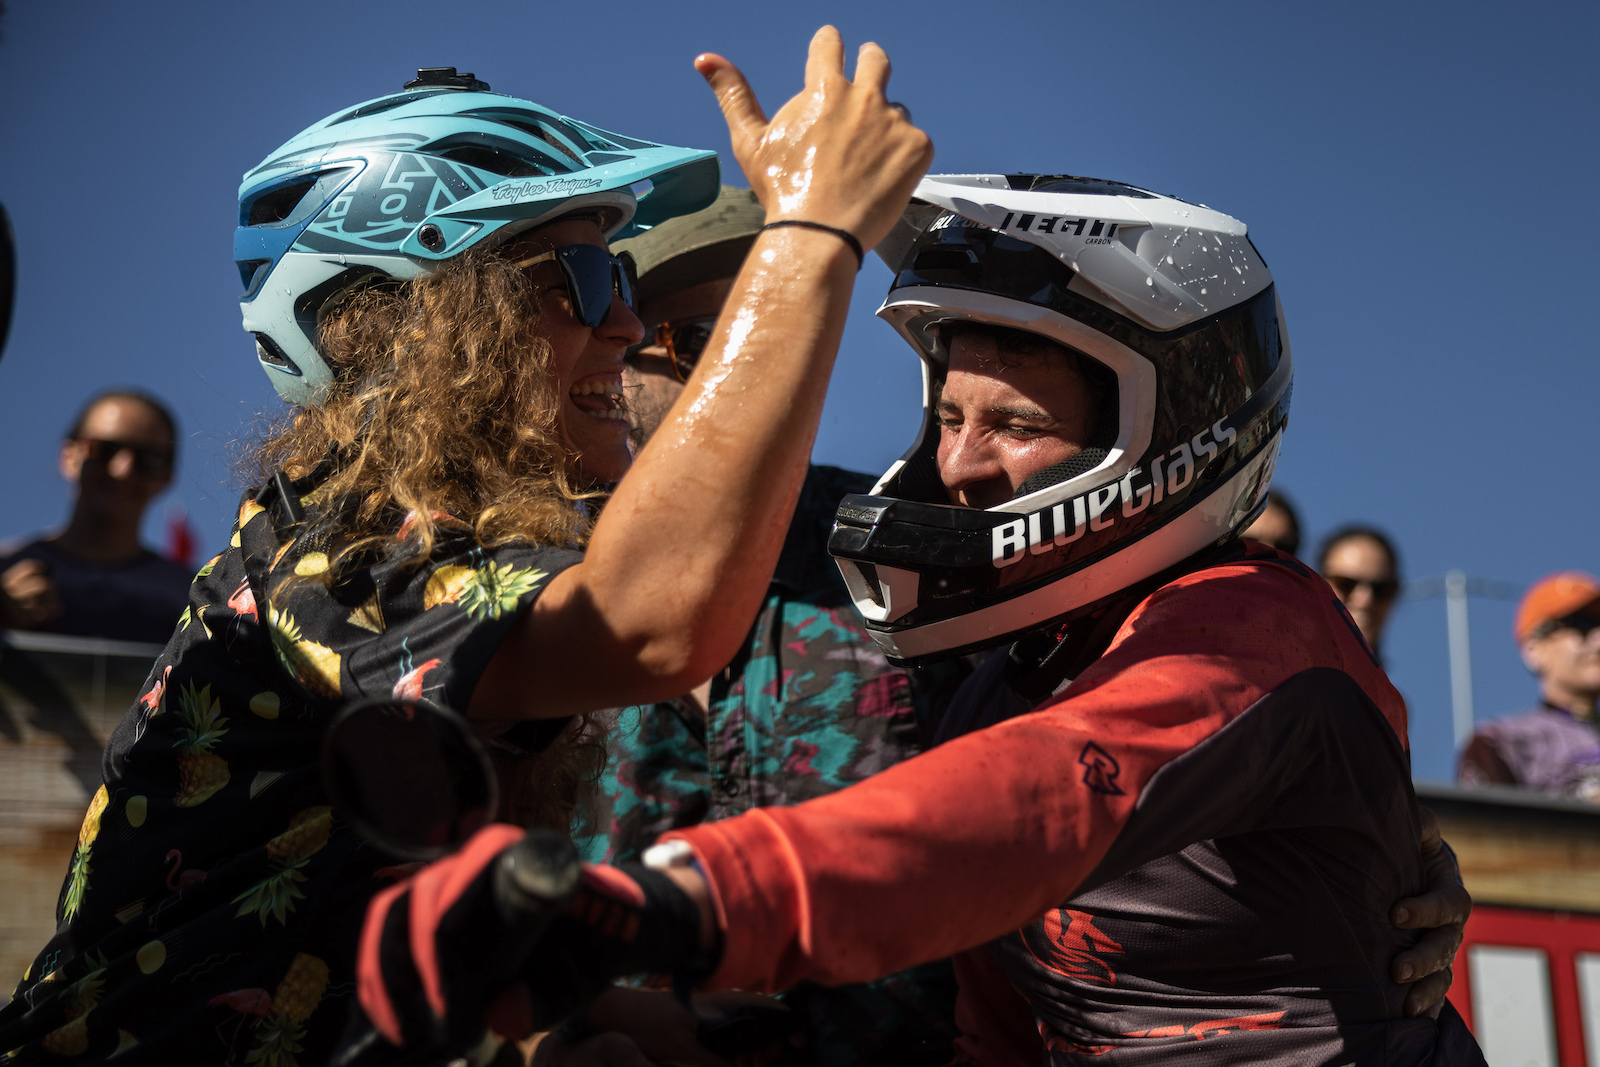 Pure elation from Flo Espineira with her first ever EWS podium